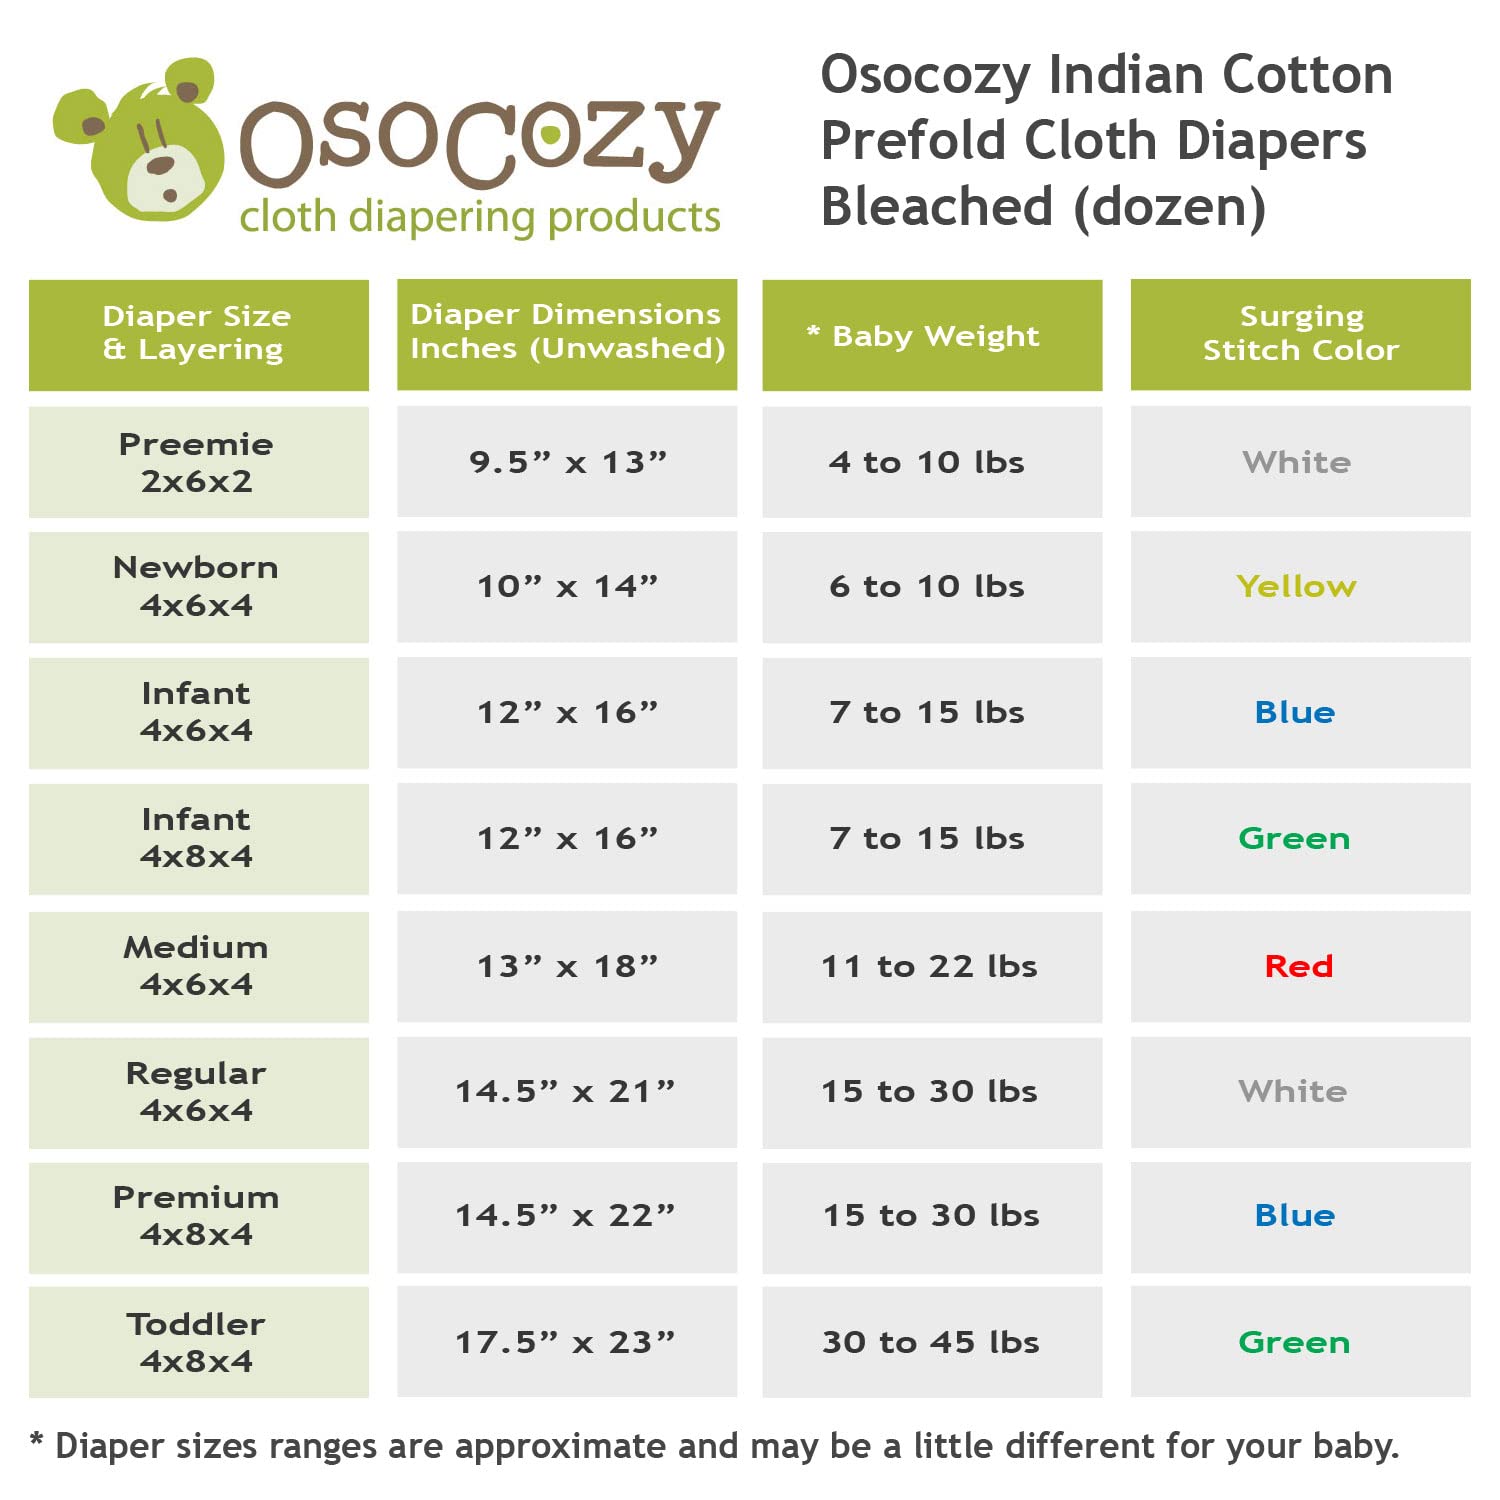 OsoCozy - Indian Cotton Prefolds (Dozen) - Soft and Absorbent Baby Diapers Made of 100% Indian Cotton - 14.5